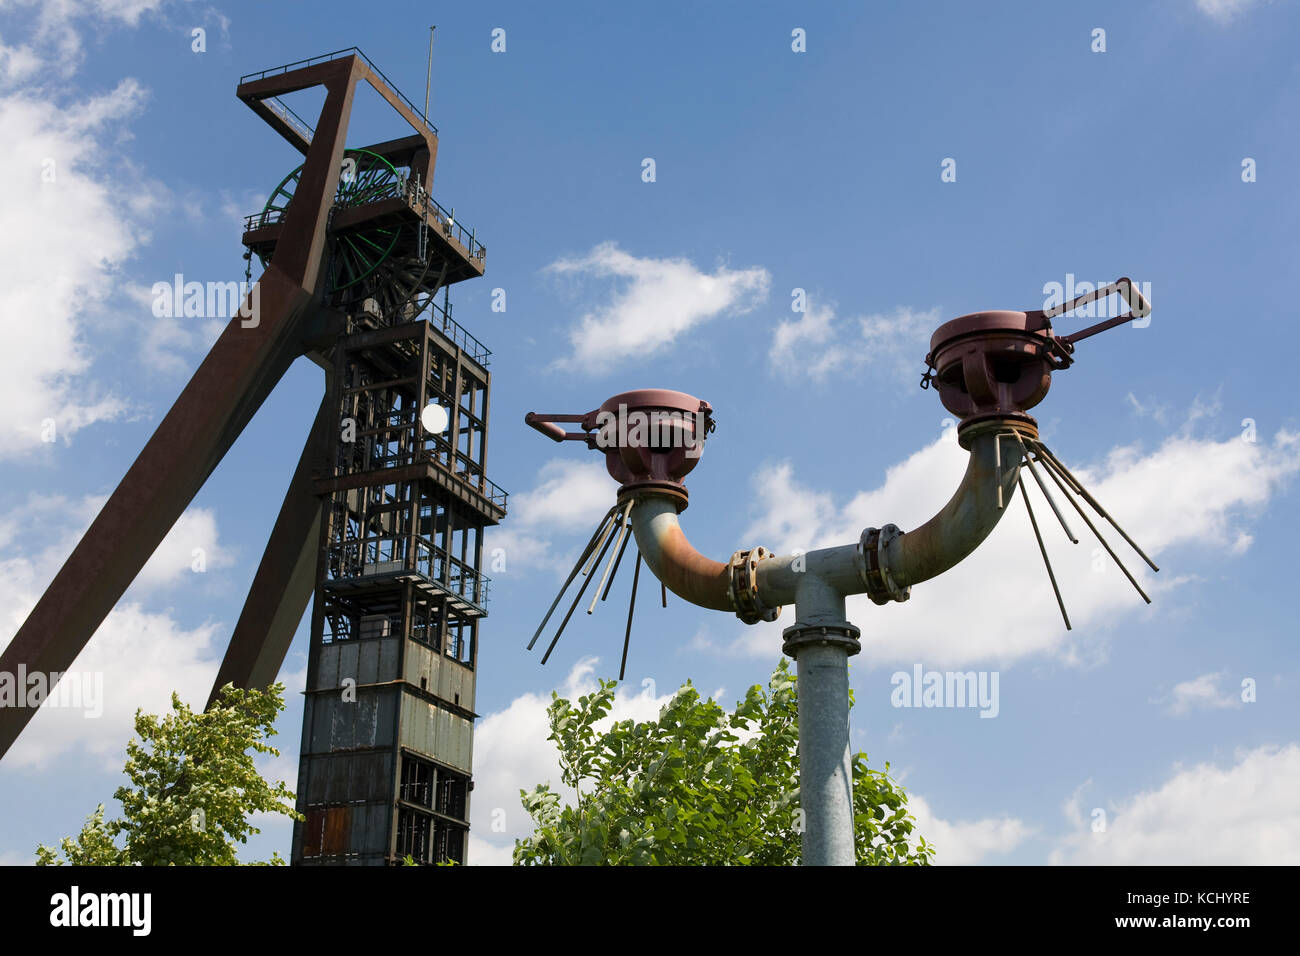 Germany, Ruhr area, Recklinghausen, a deflagration flame arrester called Protegofilter in front of the headgear of the disused coal-mine Recklinghause Stock Photo